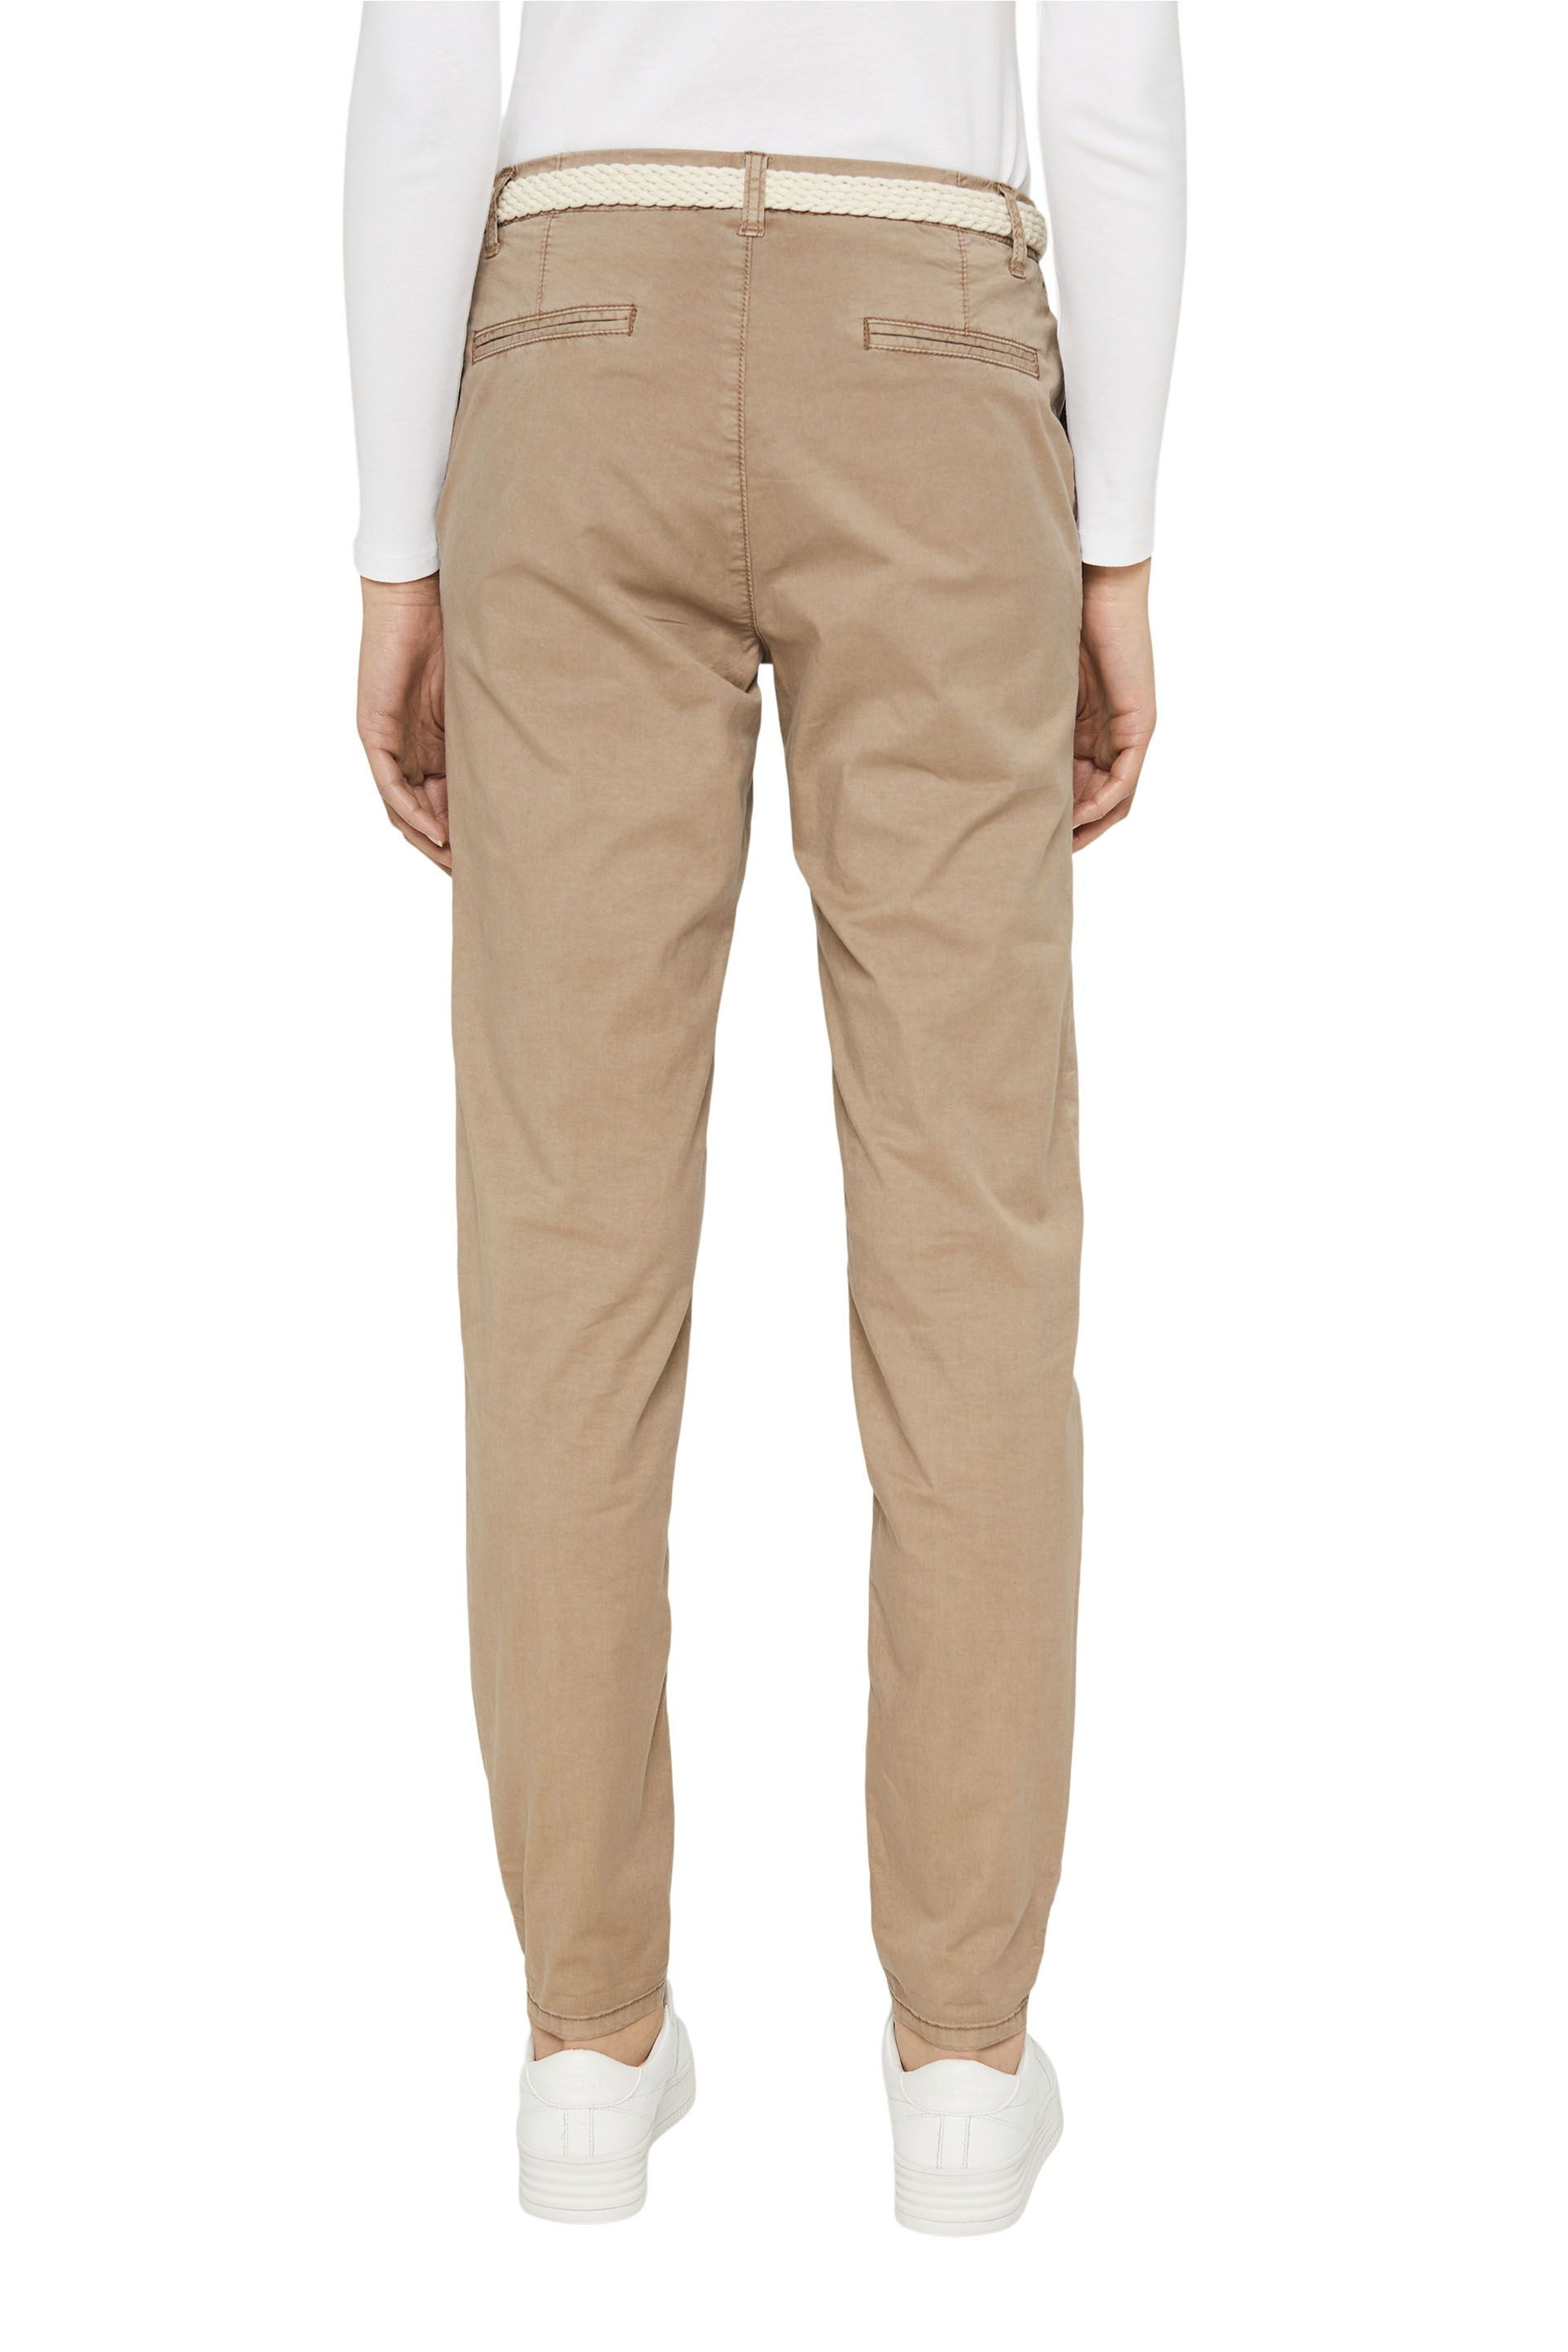 Chino trousers with woven belt, Nougat Beige, large image number 2